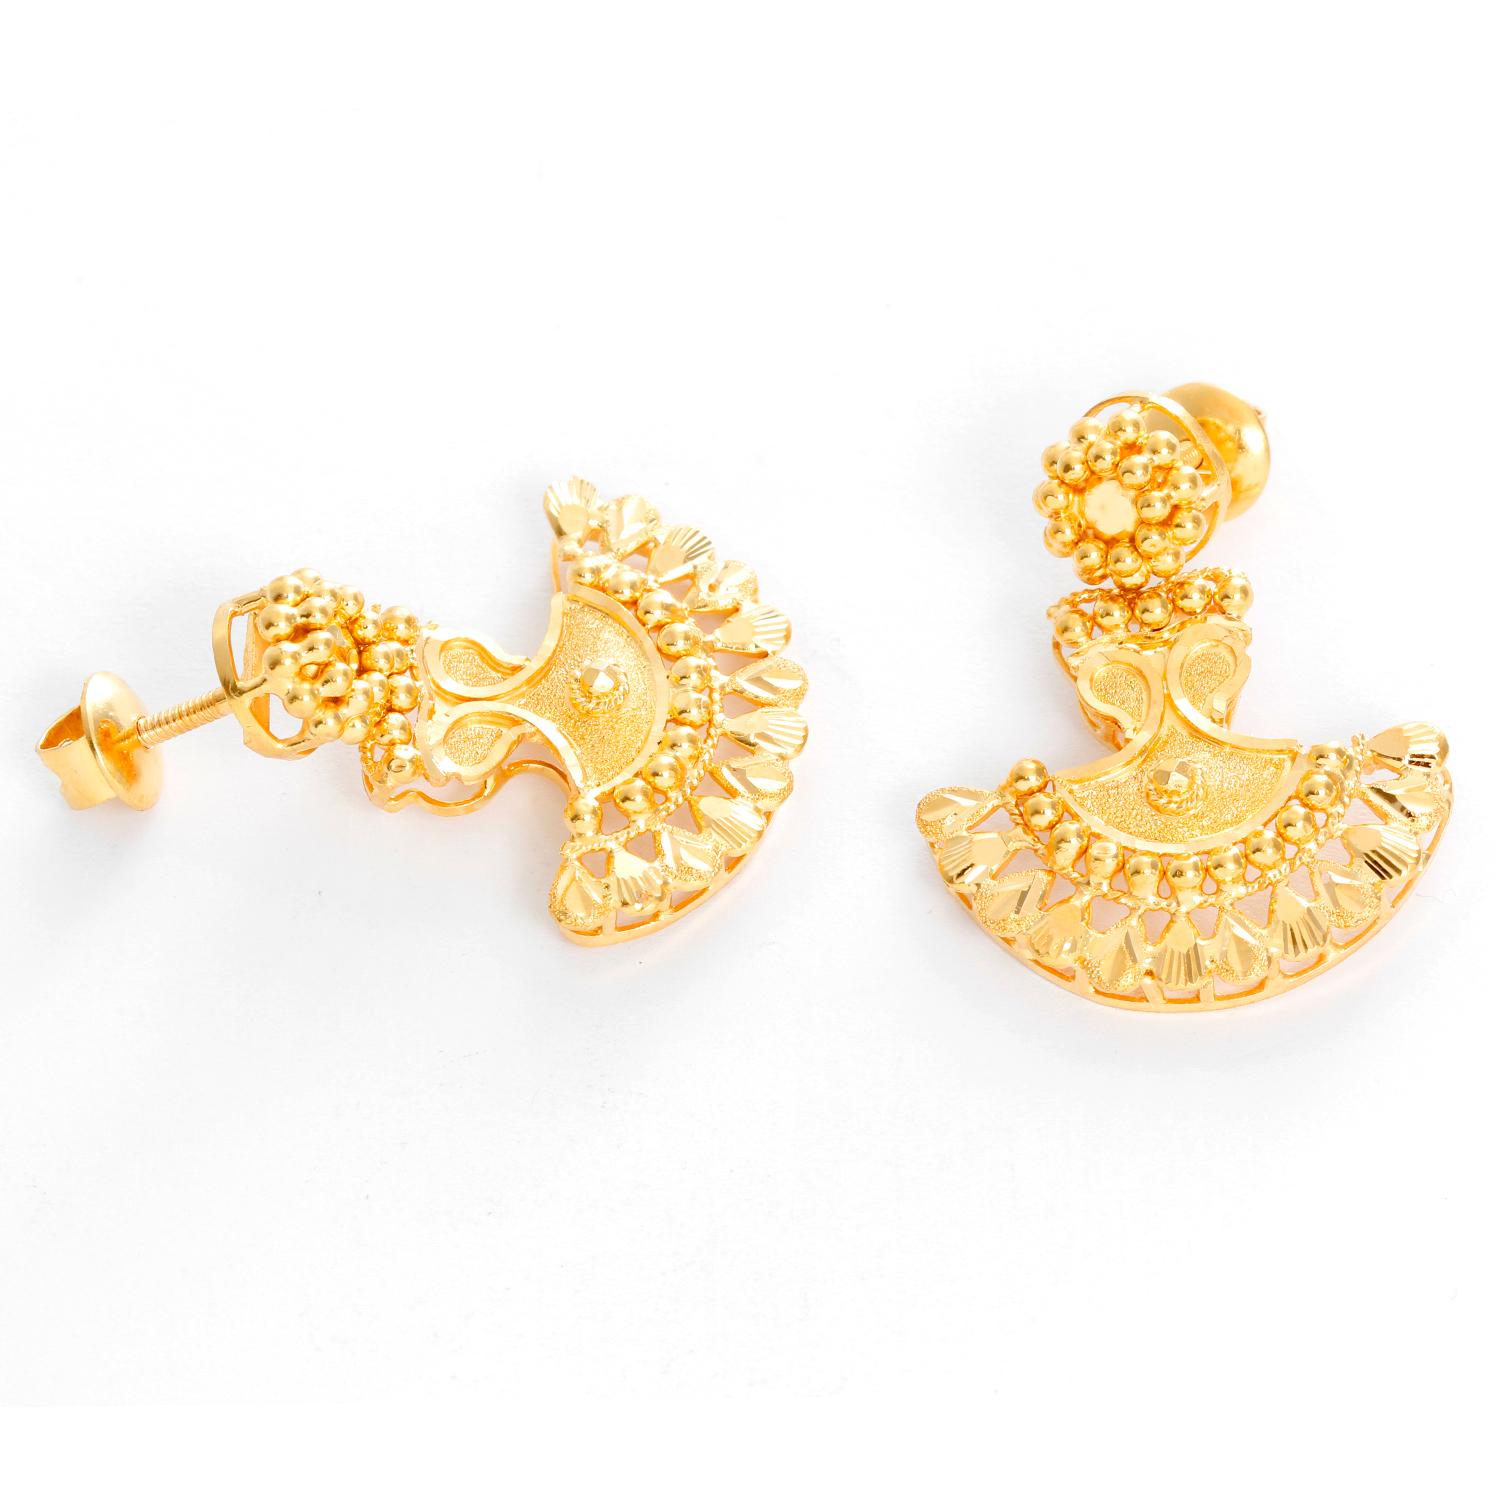 22K Yellow Gold Indian Earrings - Ornate Indian dangling earrings. 22K Yellow gold. 1 inch long. Stud back. Total weight 12.3 grams.